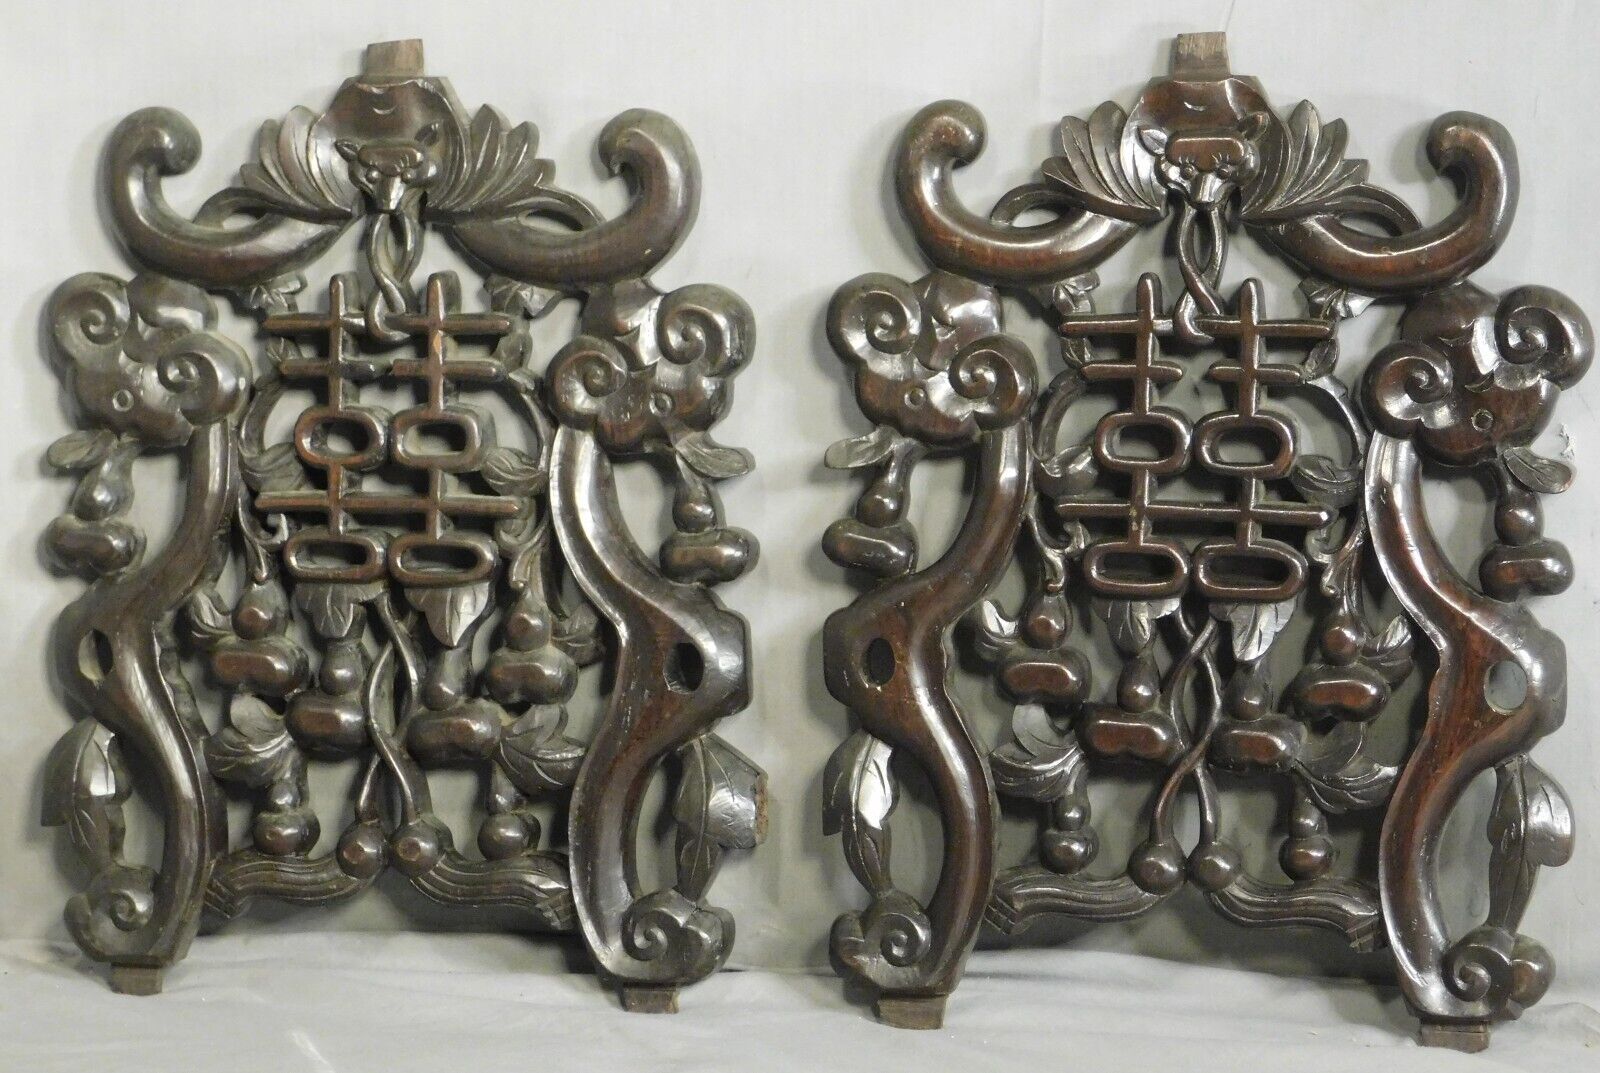 Pair Antique Rosewood Ebony Carved Chinese Fretwork Panels BATS Architectural Без бренда